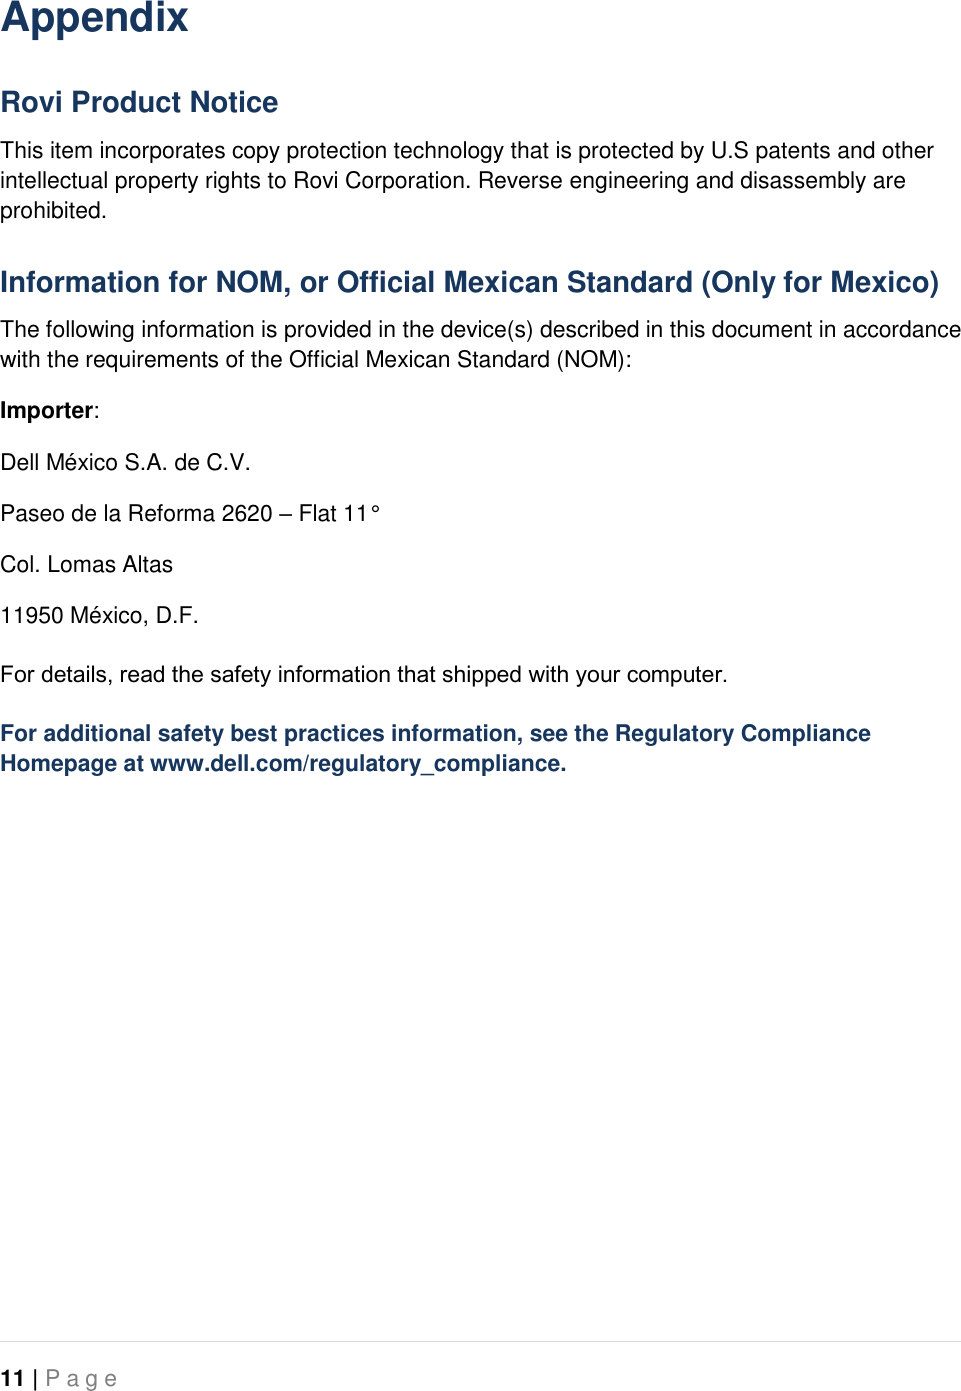   11 | P a g e   Appendix Rovi Product Notice This item incorporates copy protection technology that is protected by U.S patents and other intellectual property rights to Rovi Corporation. Reverse engineering and disassembly are prohibited. Information for NOM, or Official Mexican Standard (Only for Mexico) The following information is provided in the device(s) described in this document in accordance with the requirements of the Official Mexican Standard (NOM): Importer: Dell México S.A. de C.V. Paseo de la Reforma 2620 – Flat 11° Col. Lomas Altas 11950 México, D.F. For details, read the safety information that shipped with your computer. For additional safety best practices information, see the Regulatory Compliance Homepage at www.dell.com/regulatory_compliance.  